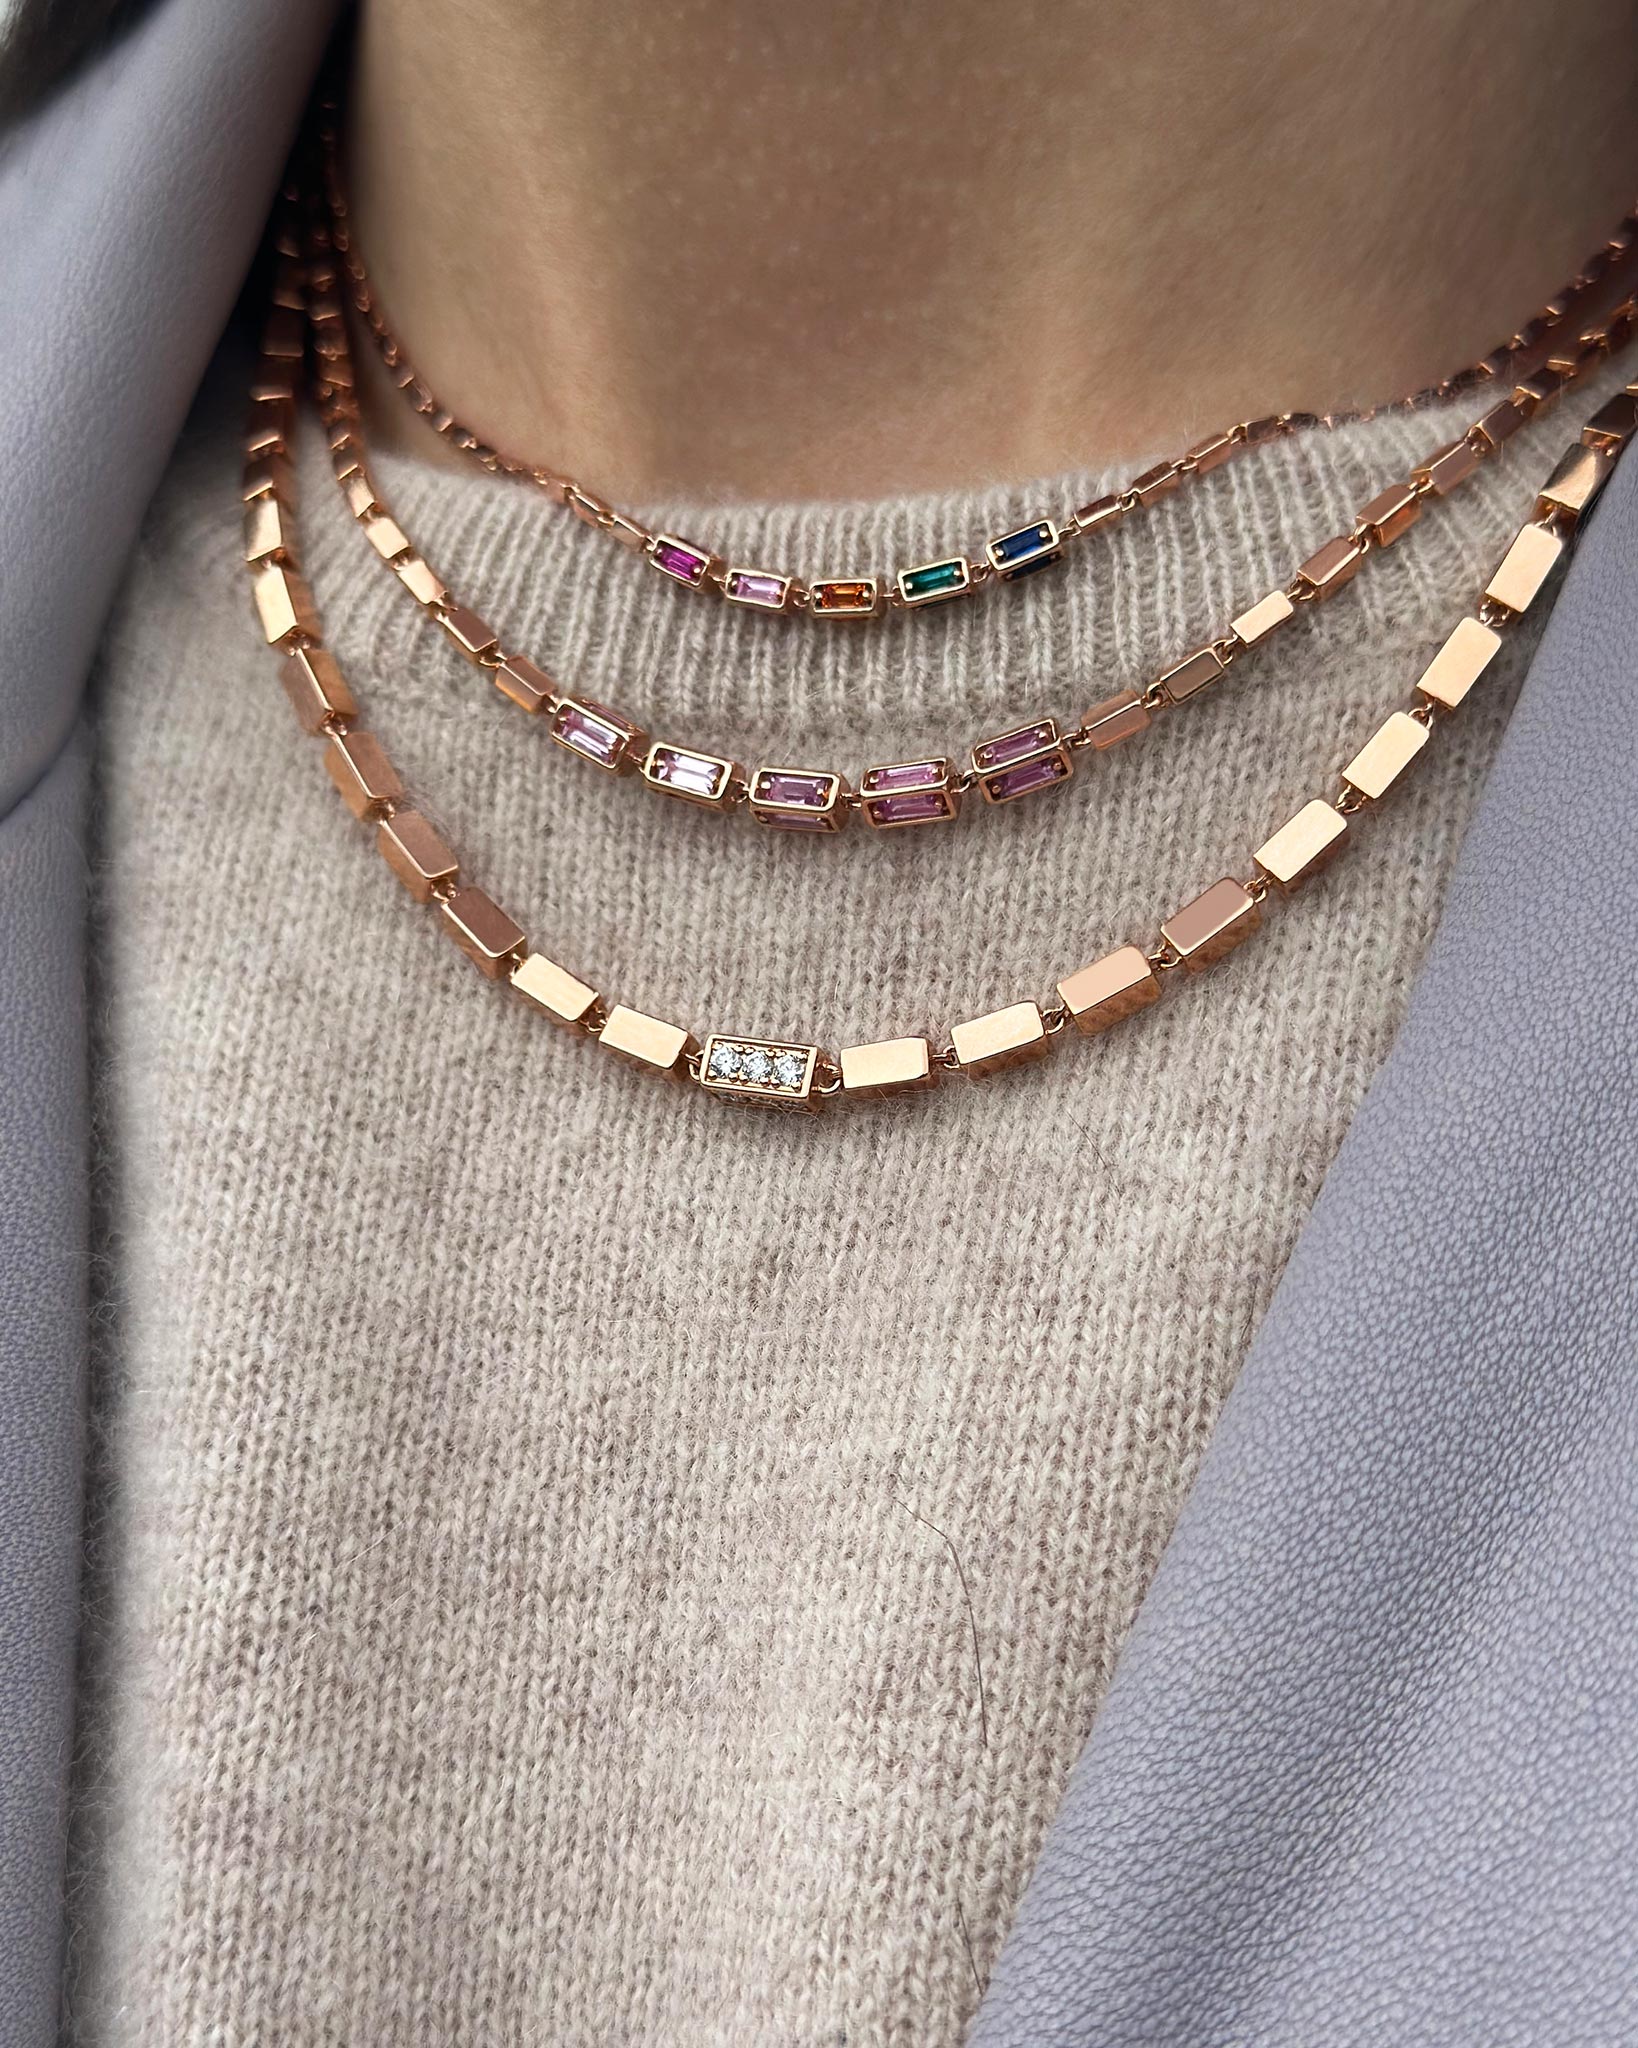 Suzanne Kalan model styling three Block-Chain necklaces in 18k rose gold